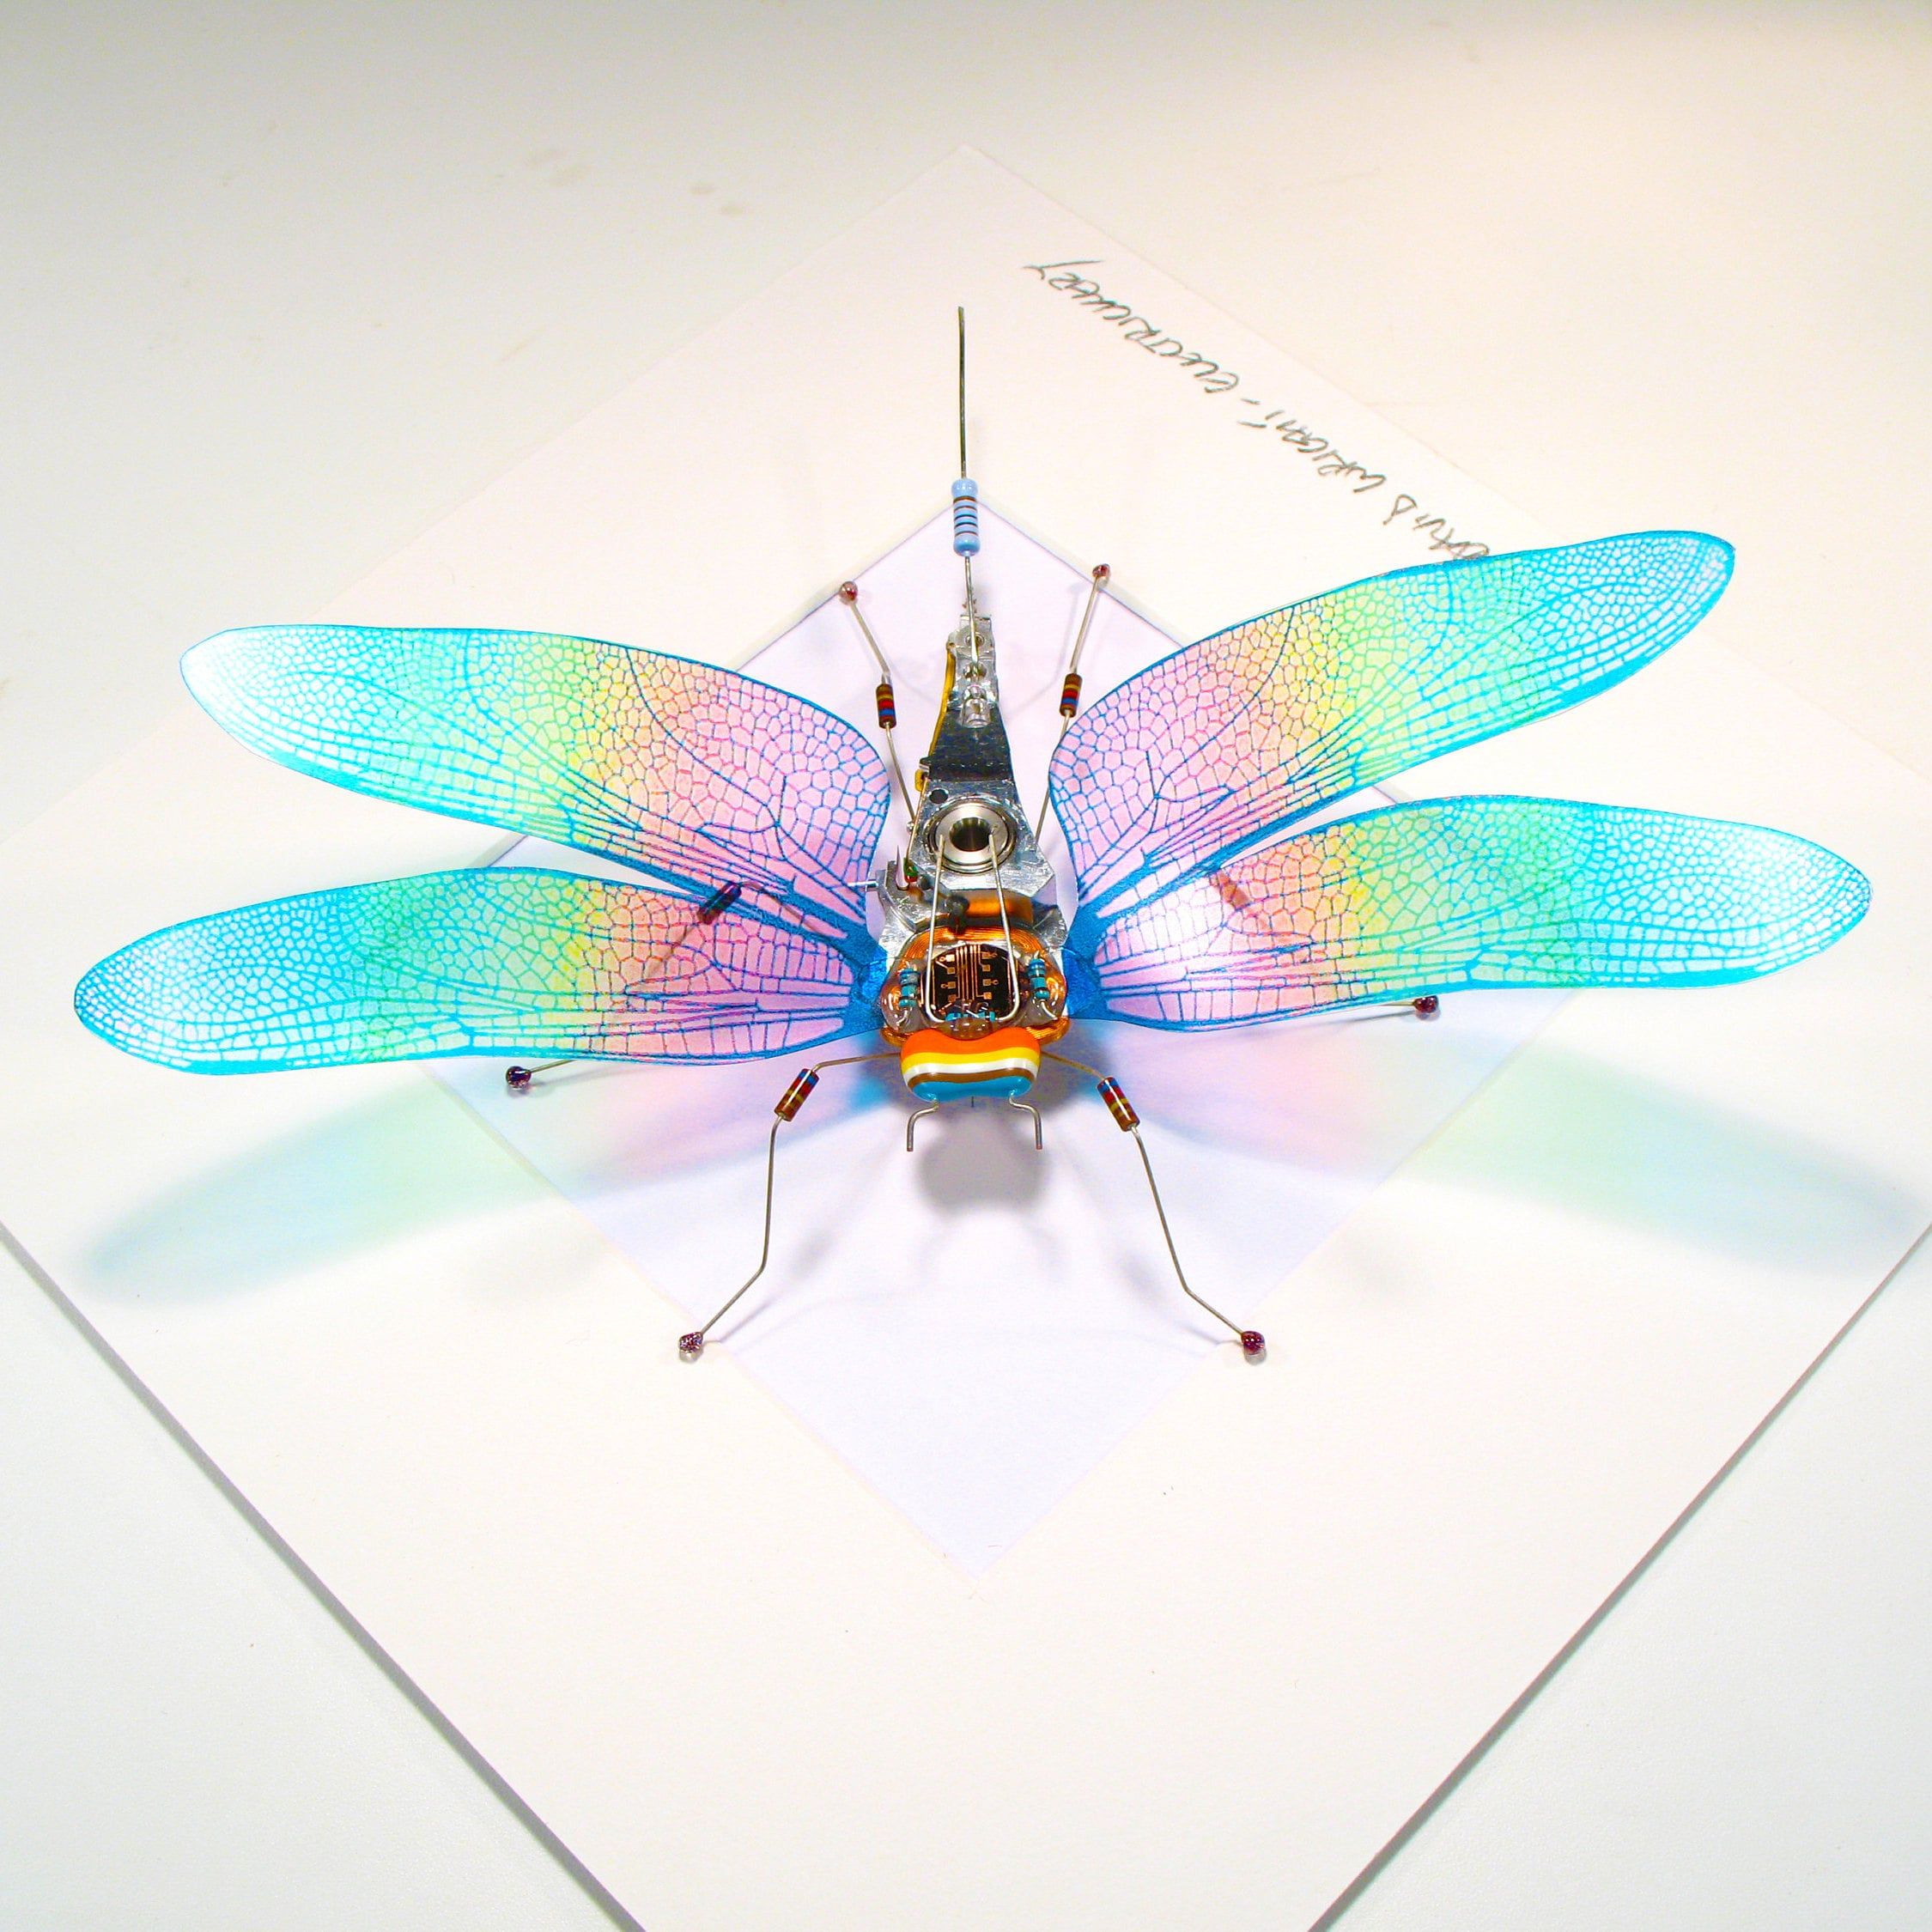 Iridescent Dragonfly Framed Wall Art | Recycled Sculpture Within Newest Dragonflies Wall Art (View 2 of 20)